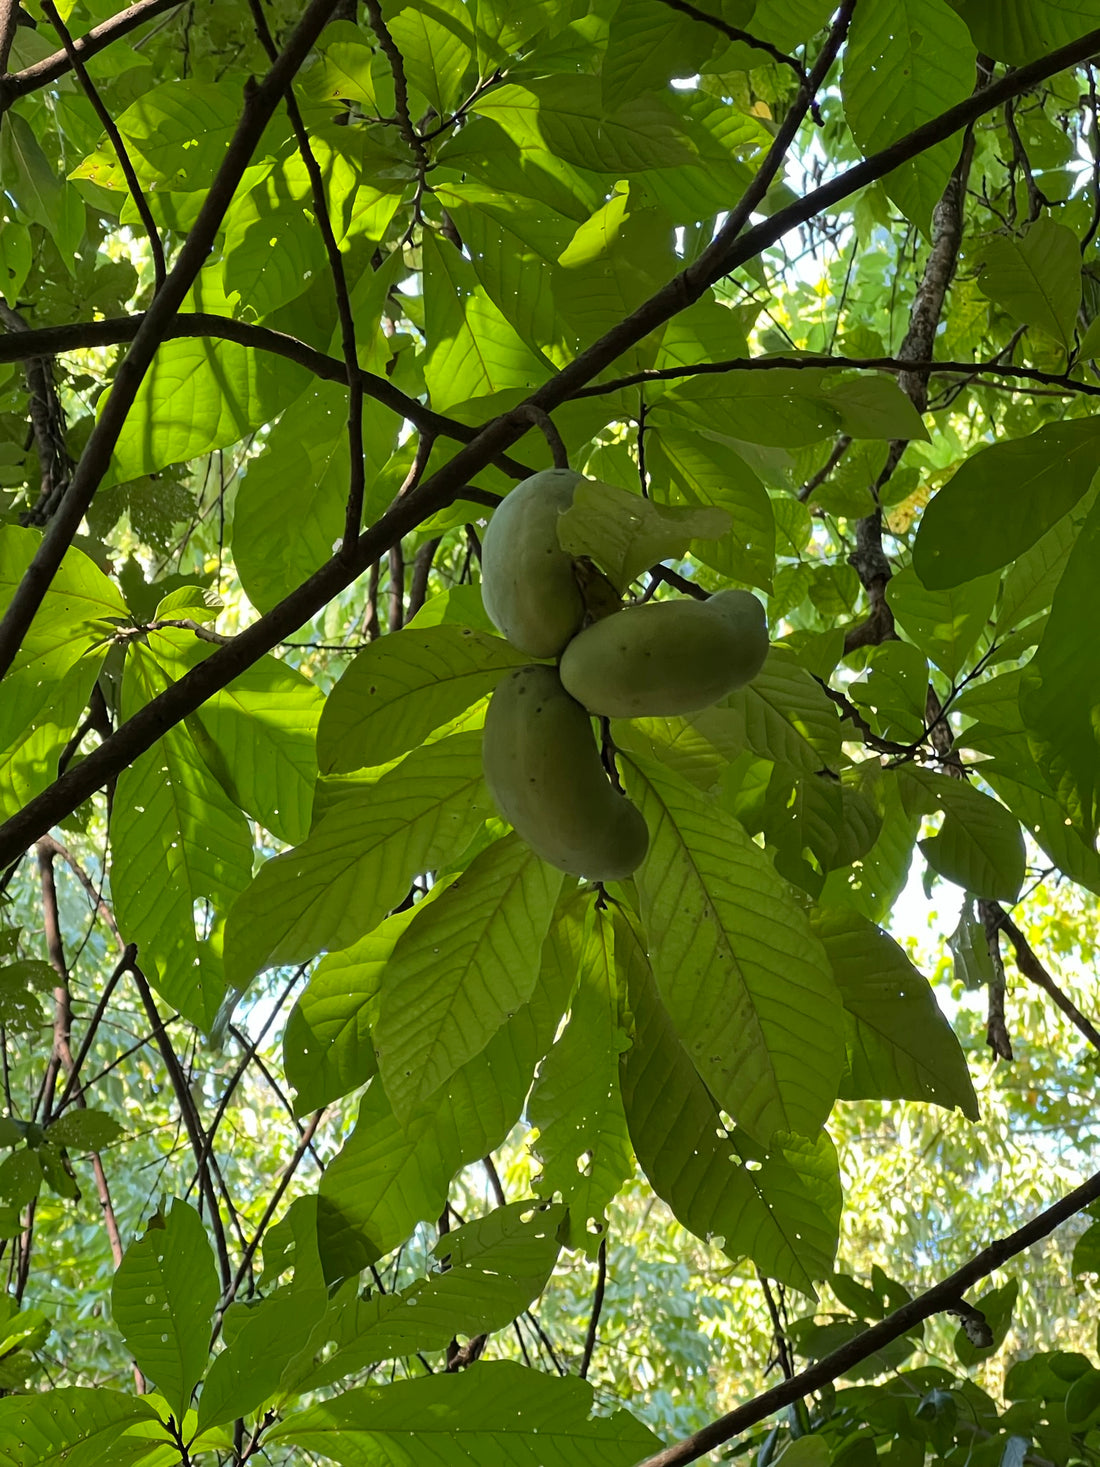 Pawpaw Fruits in the Wild